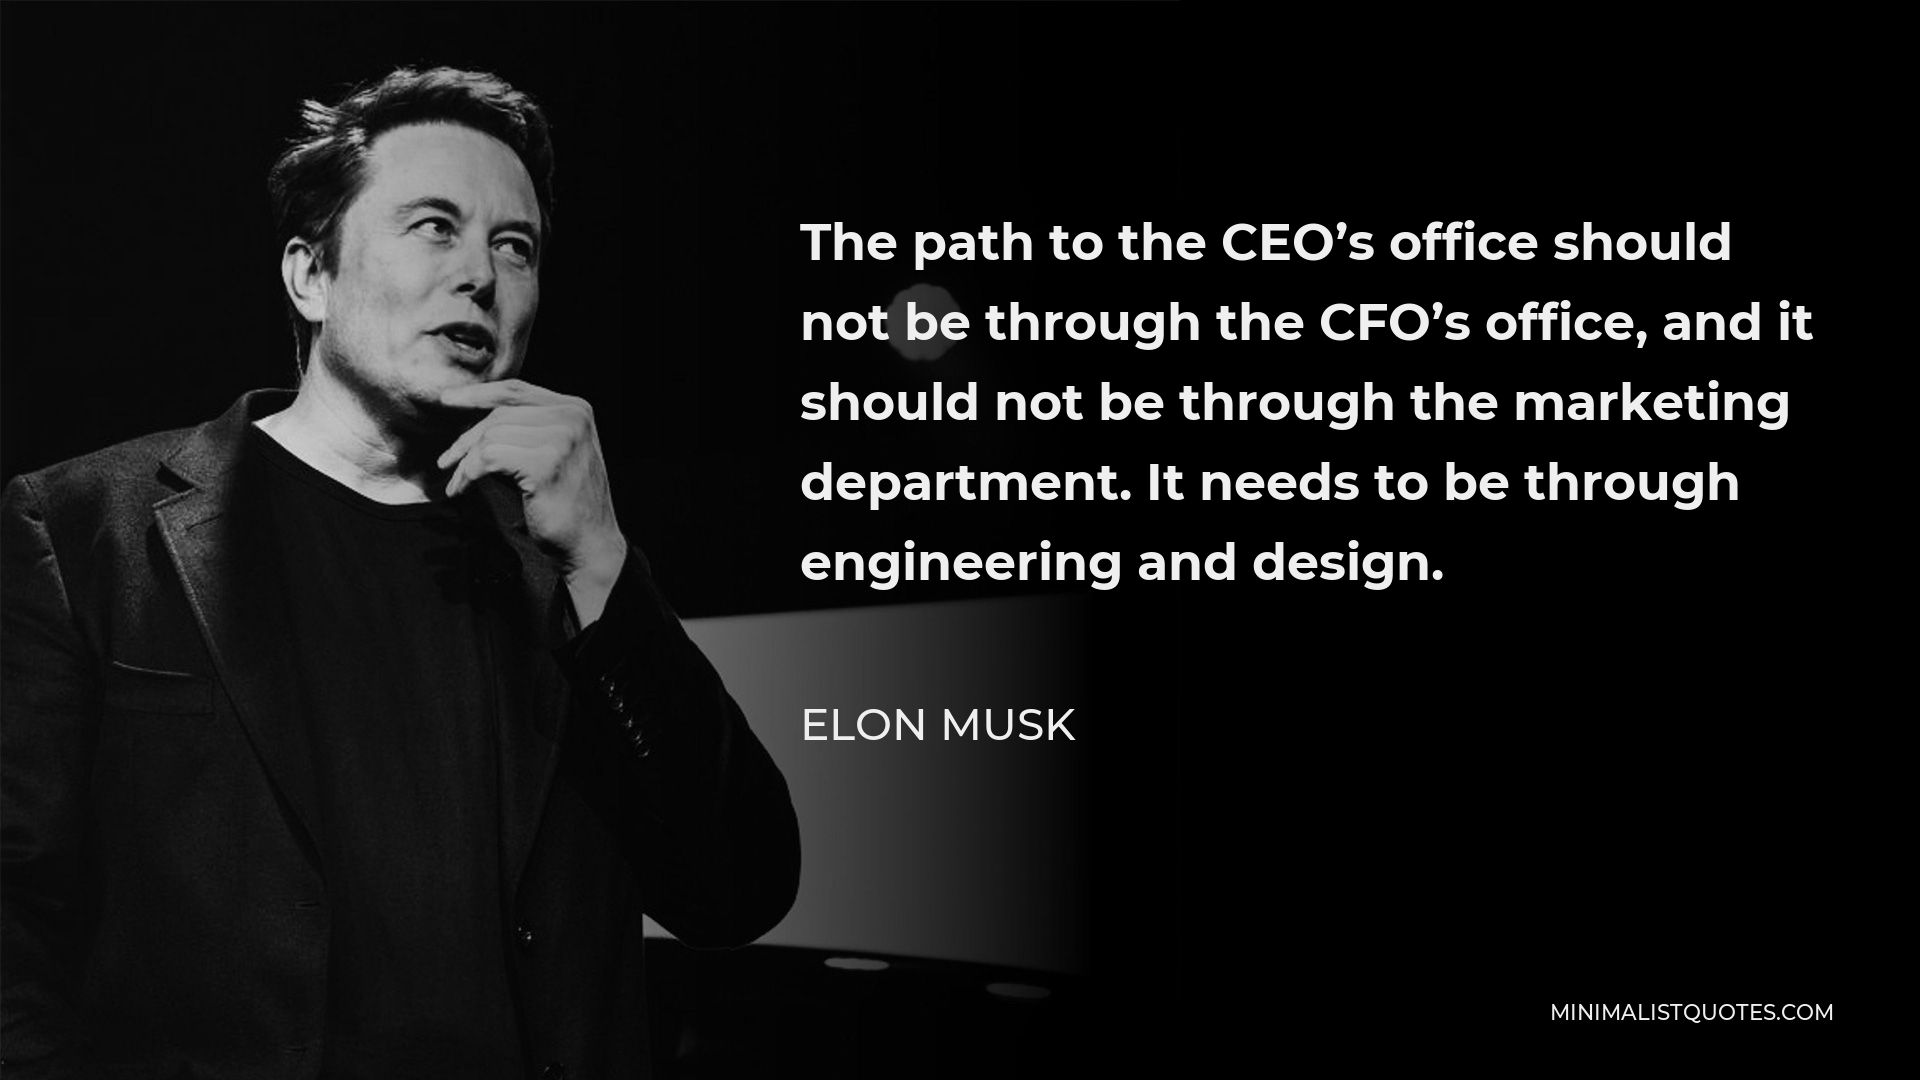 Elon Musk Quote - The path to the CEO’s office should not be through the CFO’s office, and it should not be through the marketing department. It needs to be through engineering and design.